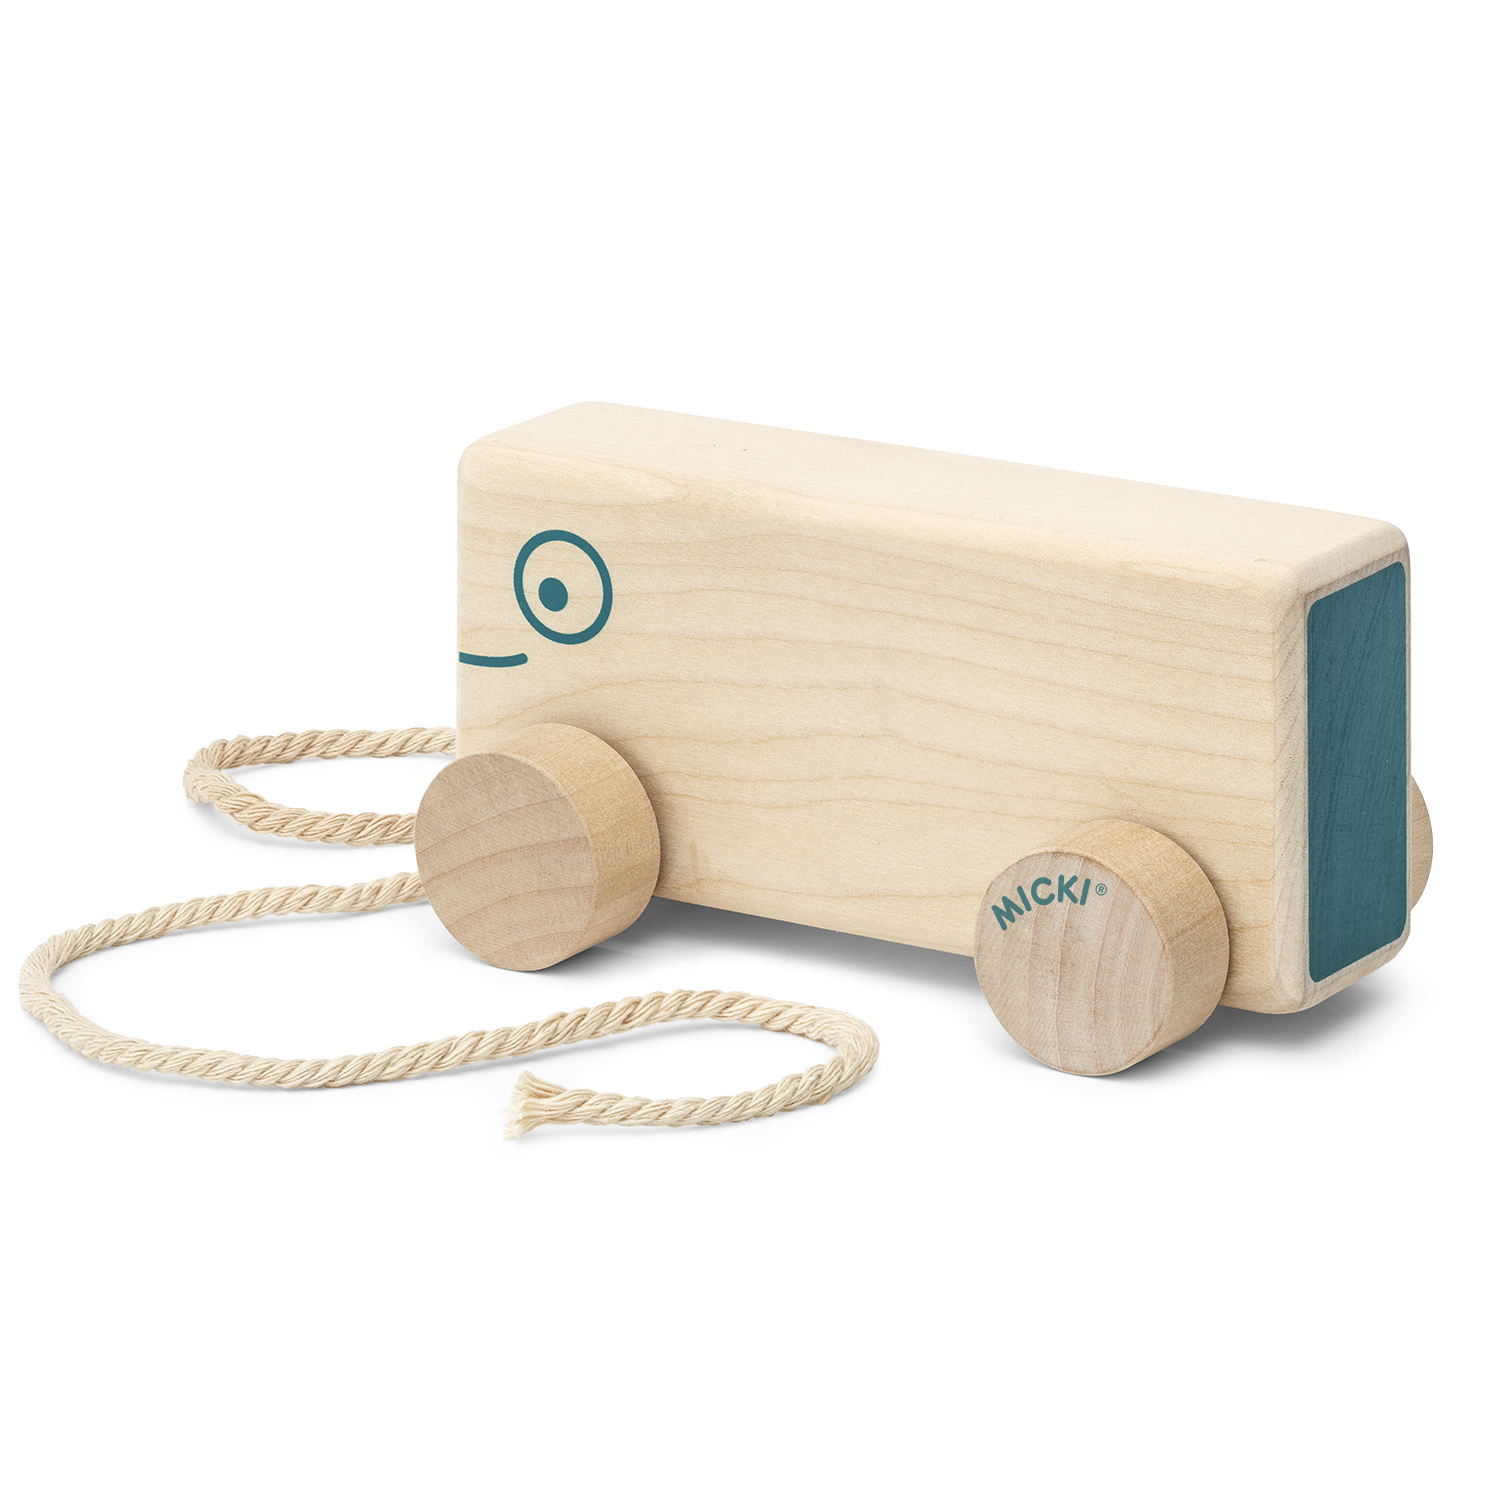 Wooden toys micki pull along toy natural wood